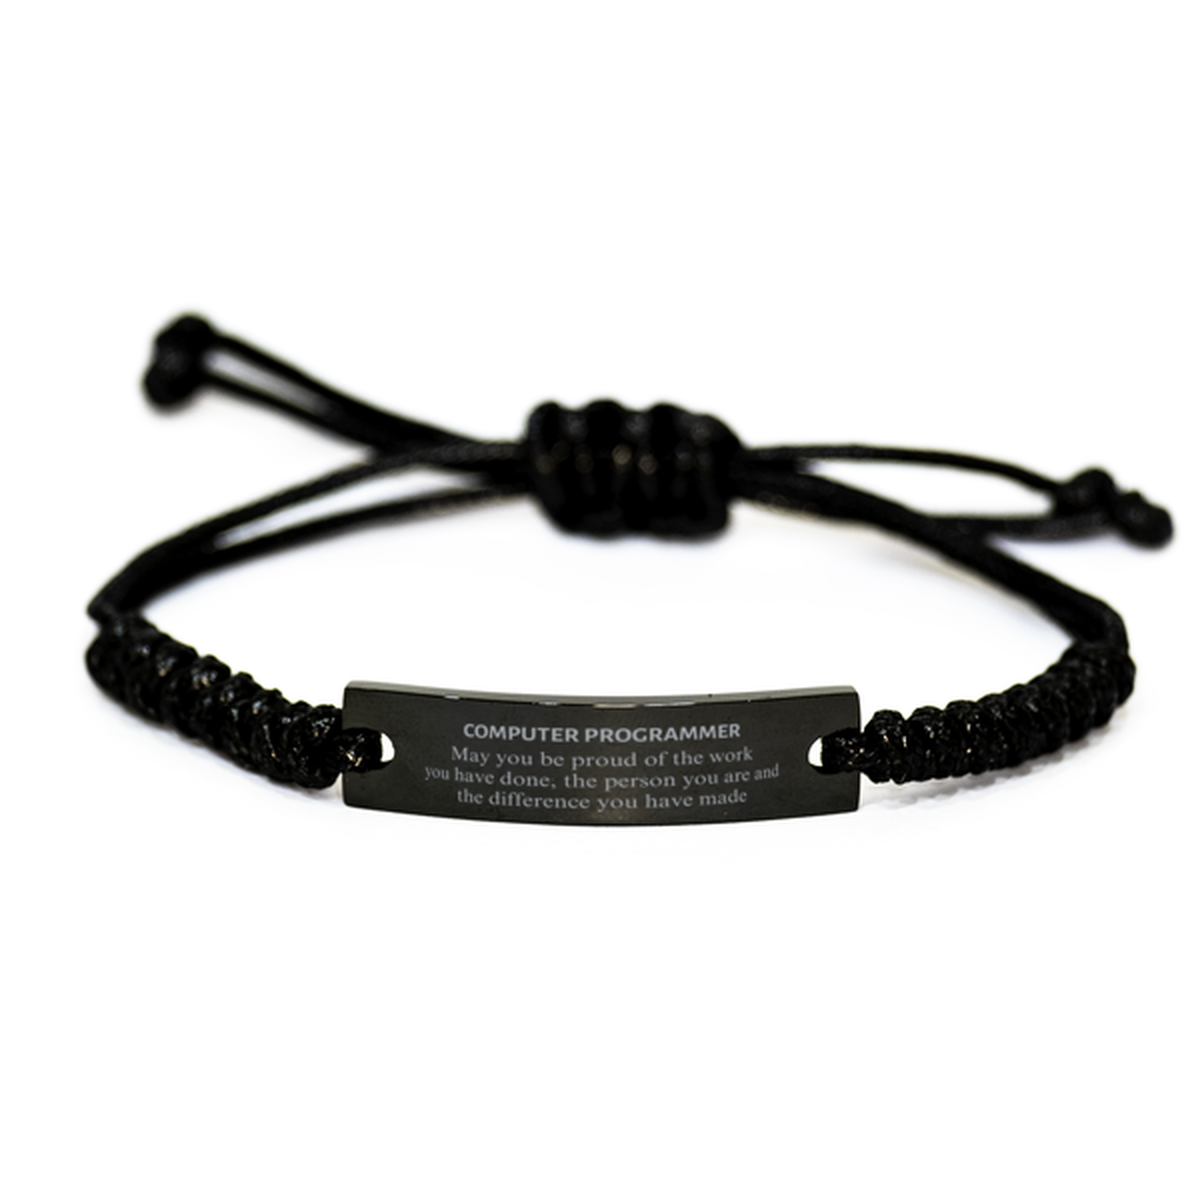 Computer Programmer May you be proud of the work you have done, Retirement Computer Programmer Black Rope Bracelet for Colleague Appreciation Gifts Amazing for Computer Programmer